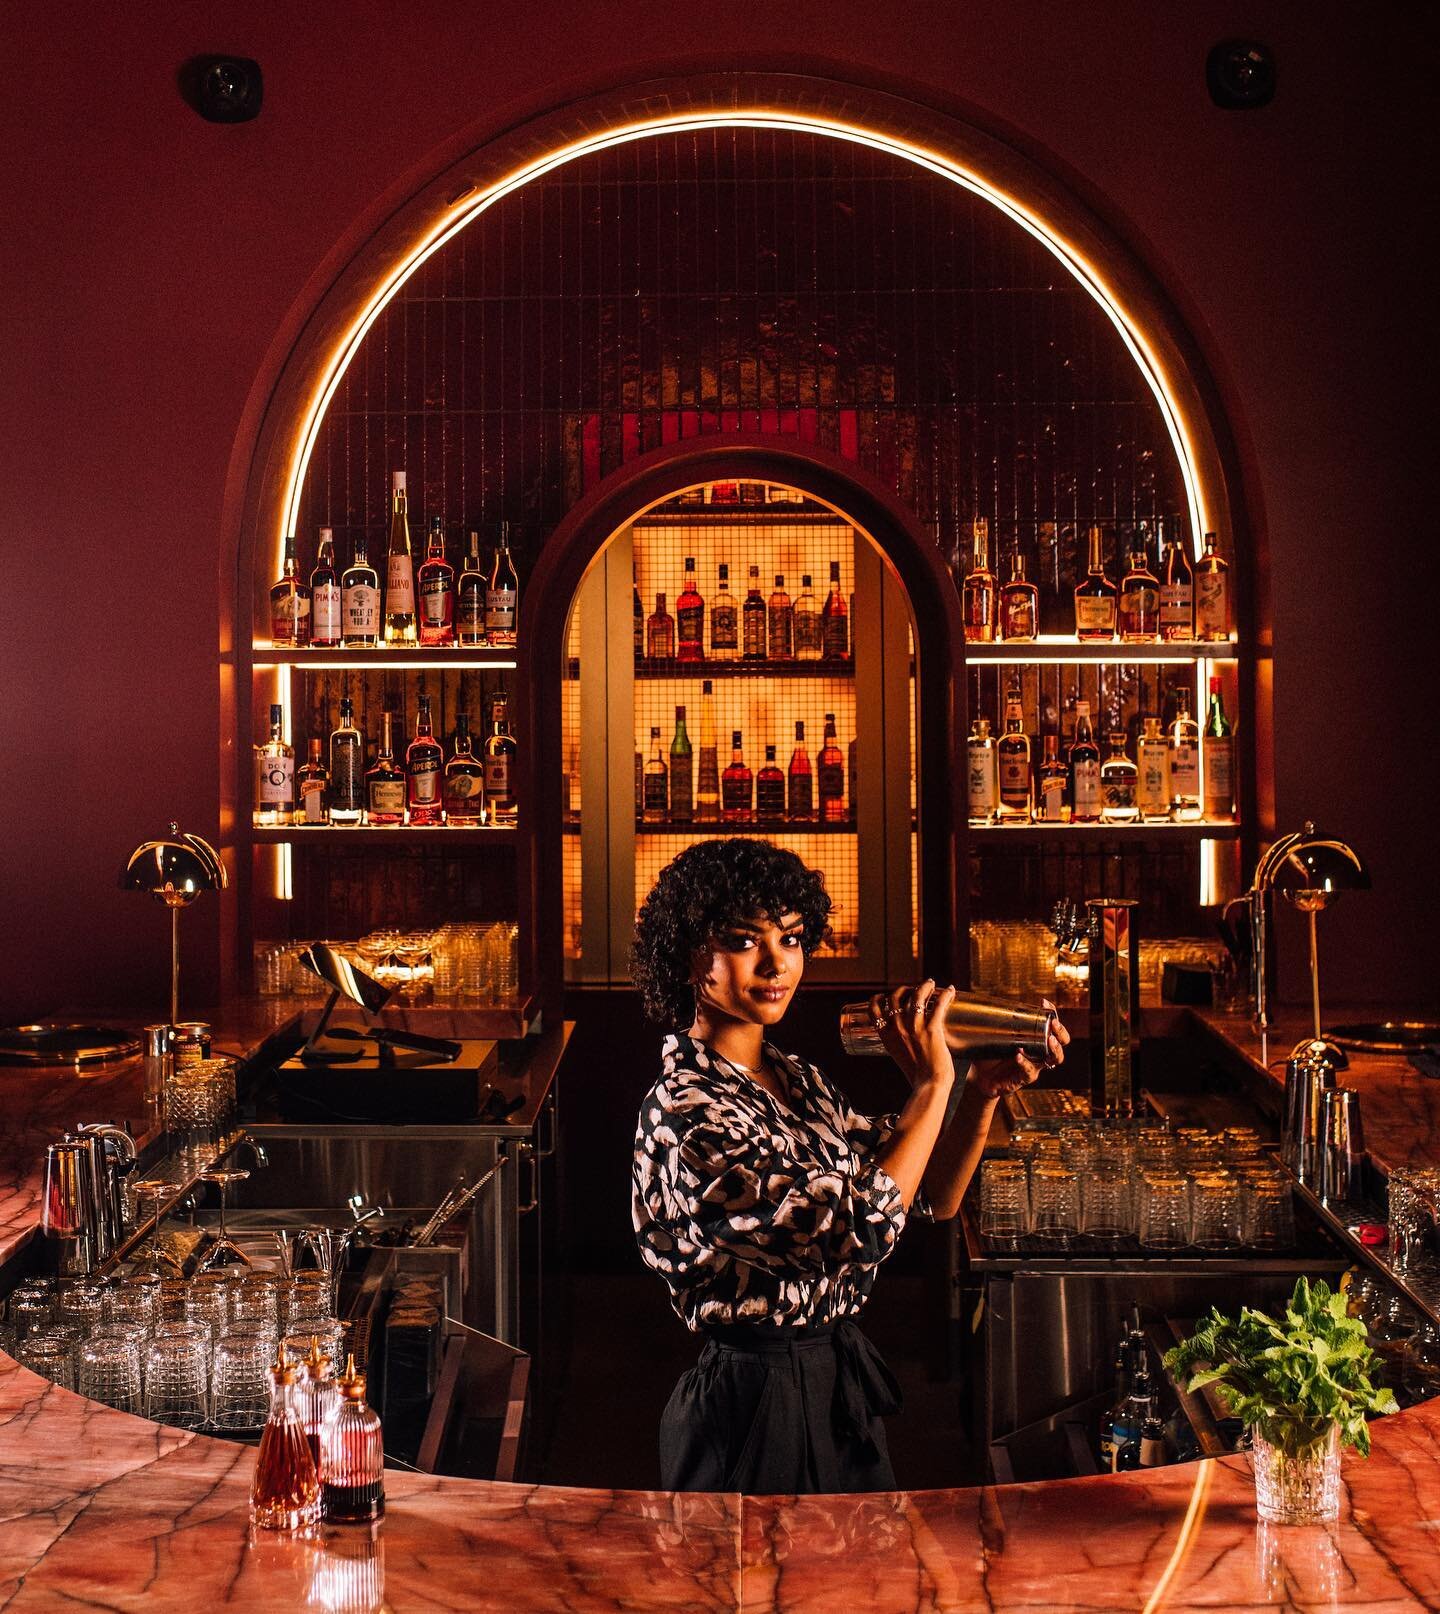 The secret is out: Jojo&rsquo;s Beloved Cocktail Lounge is opening this week (!!)
 
On July 23, 2021 Jojo&rsquo;s, our brand new cocktail space, will open to the public. You&rsquo;ll find it hidden behind a door at the back of our food hall, and the 